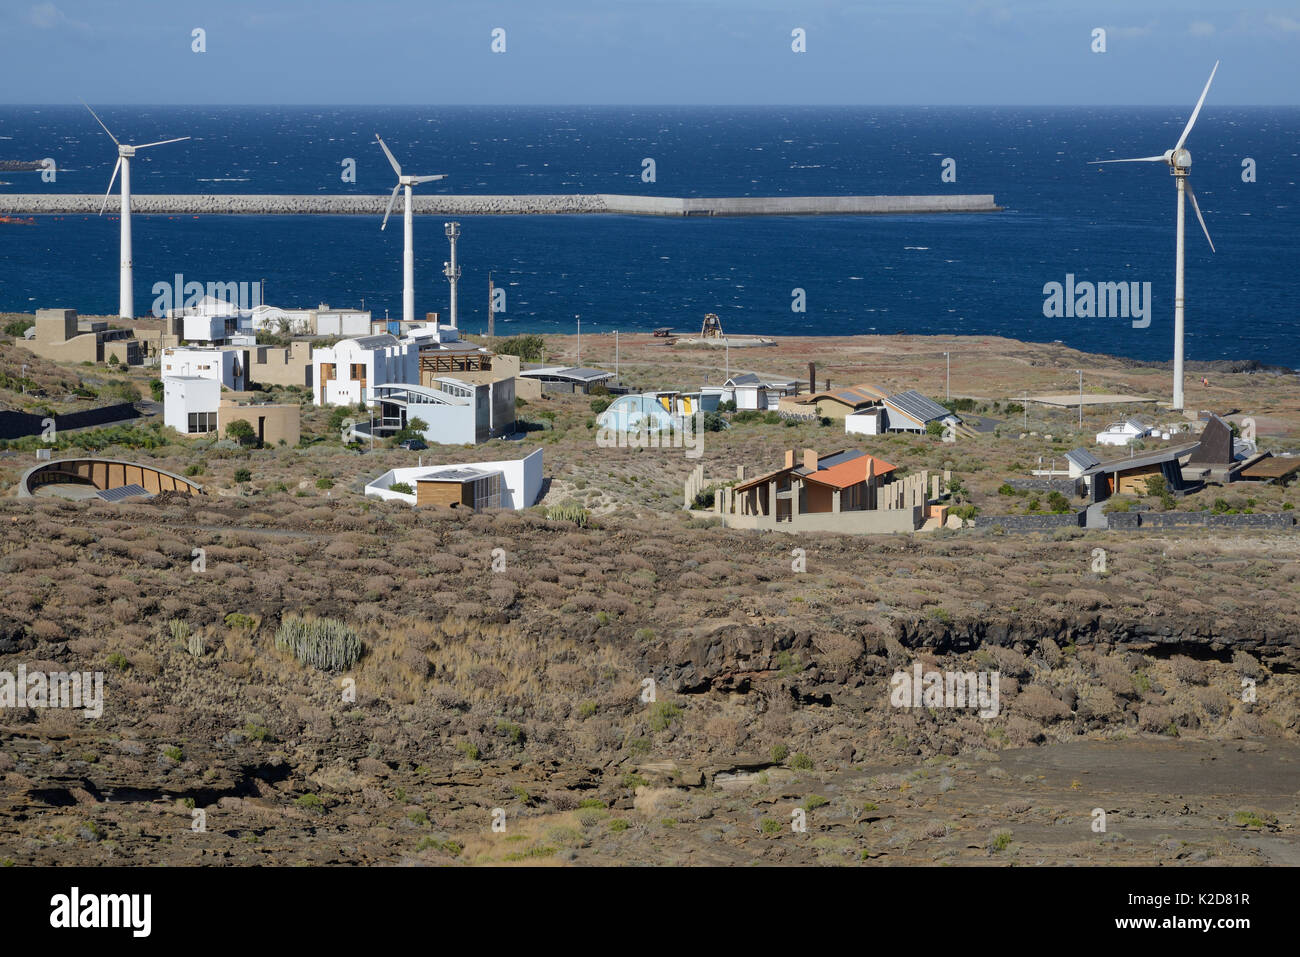 ITER Bioclimatic village, with a variety of eco-friendly houses built from recycled materials and using solar and wind energy, near El Medano, Tenerife, May. Stock Photo